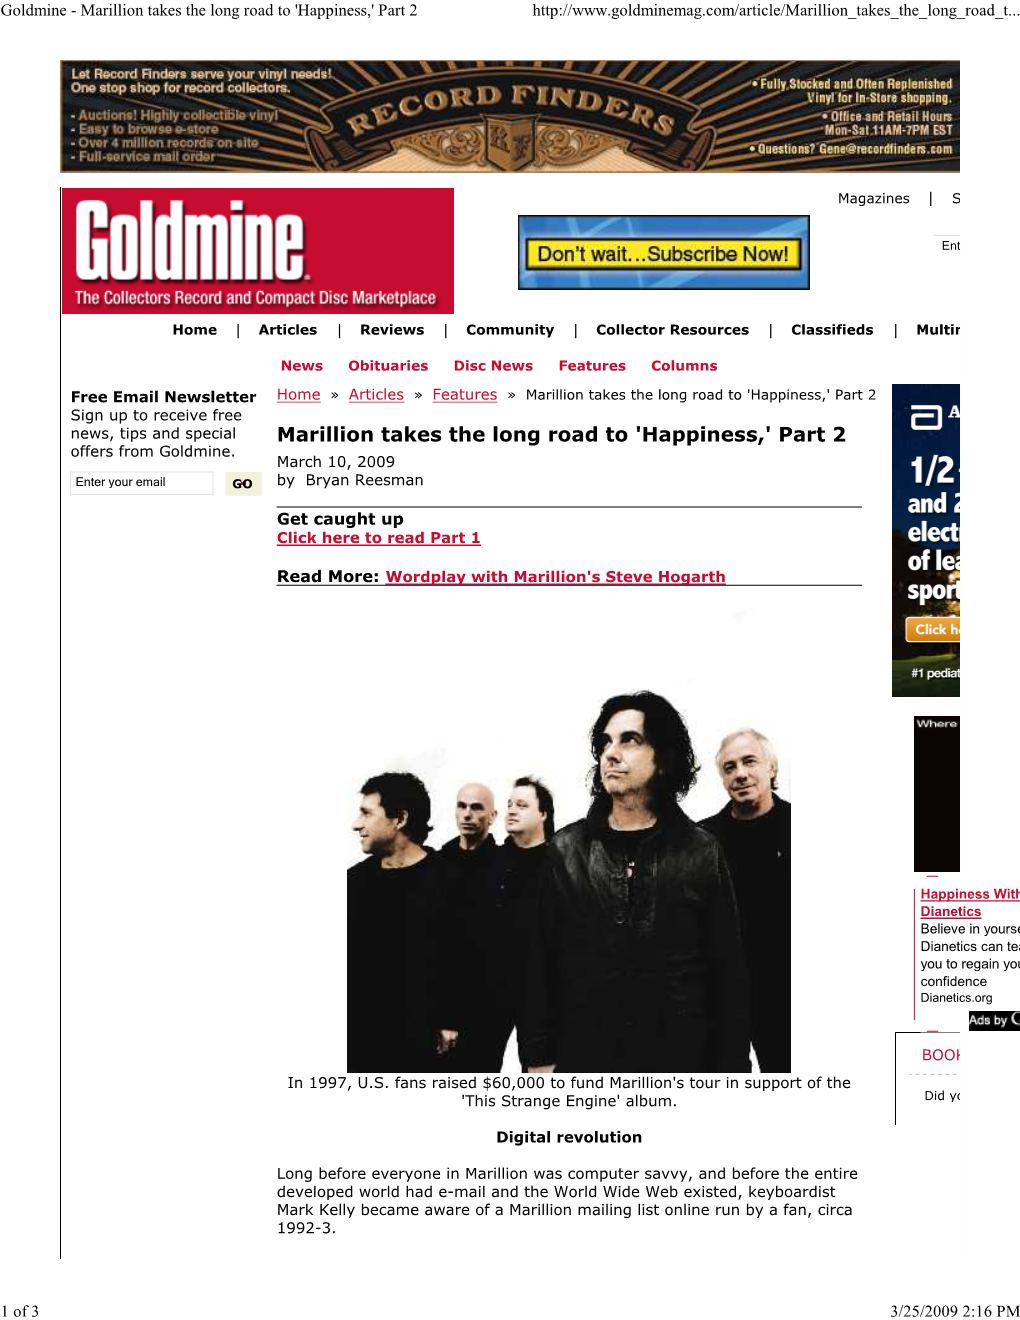 Goldmine - Marillion Takes the Long Road to 'Happiness,' Part 2